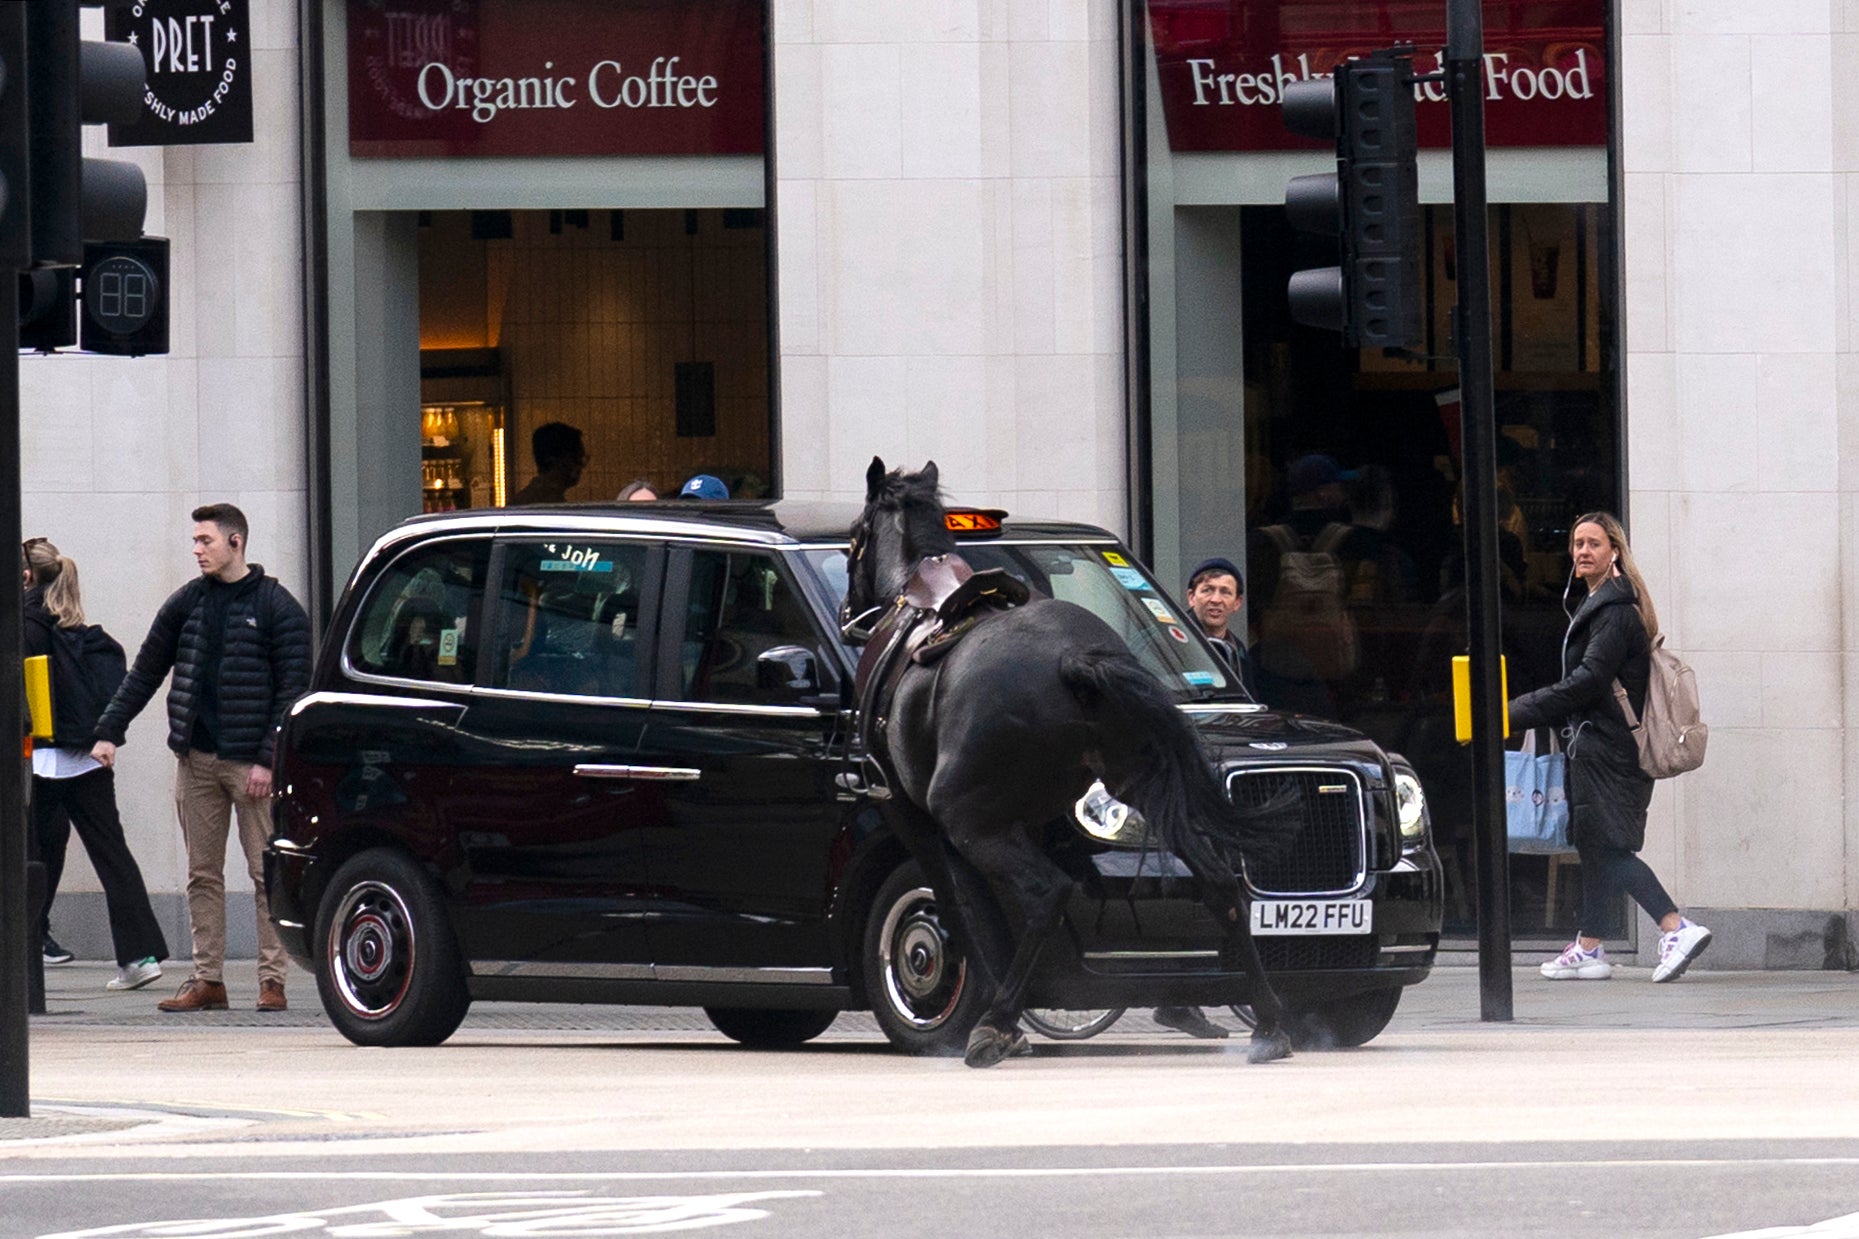 A black horse collides with a London Taxi after bolting down the A4 near Aldwych